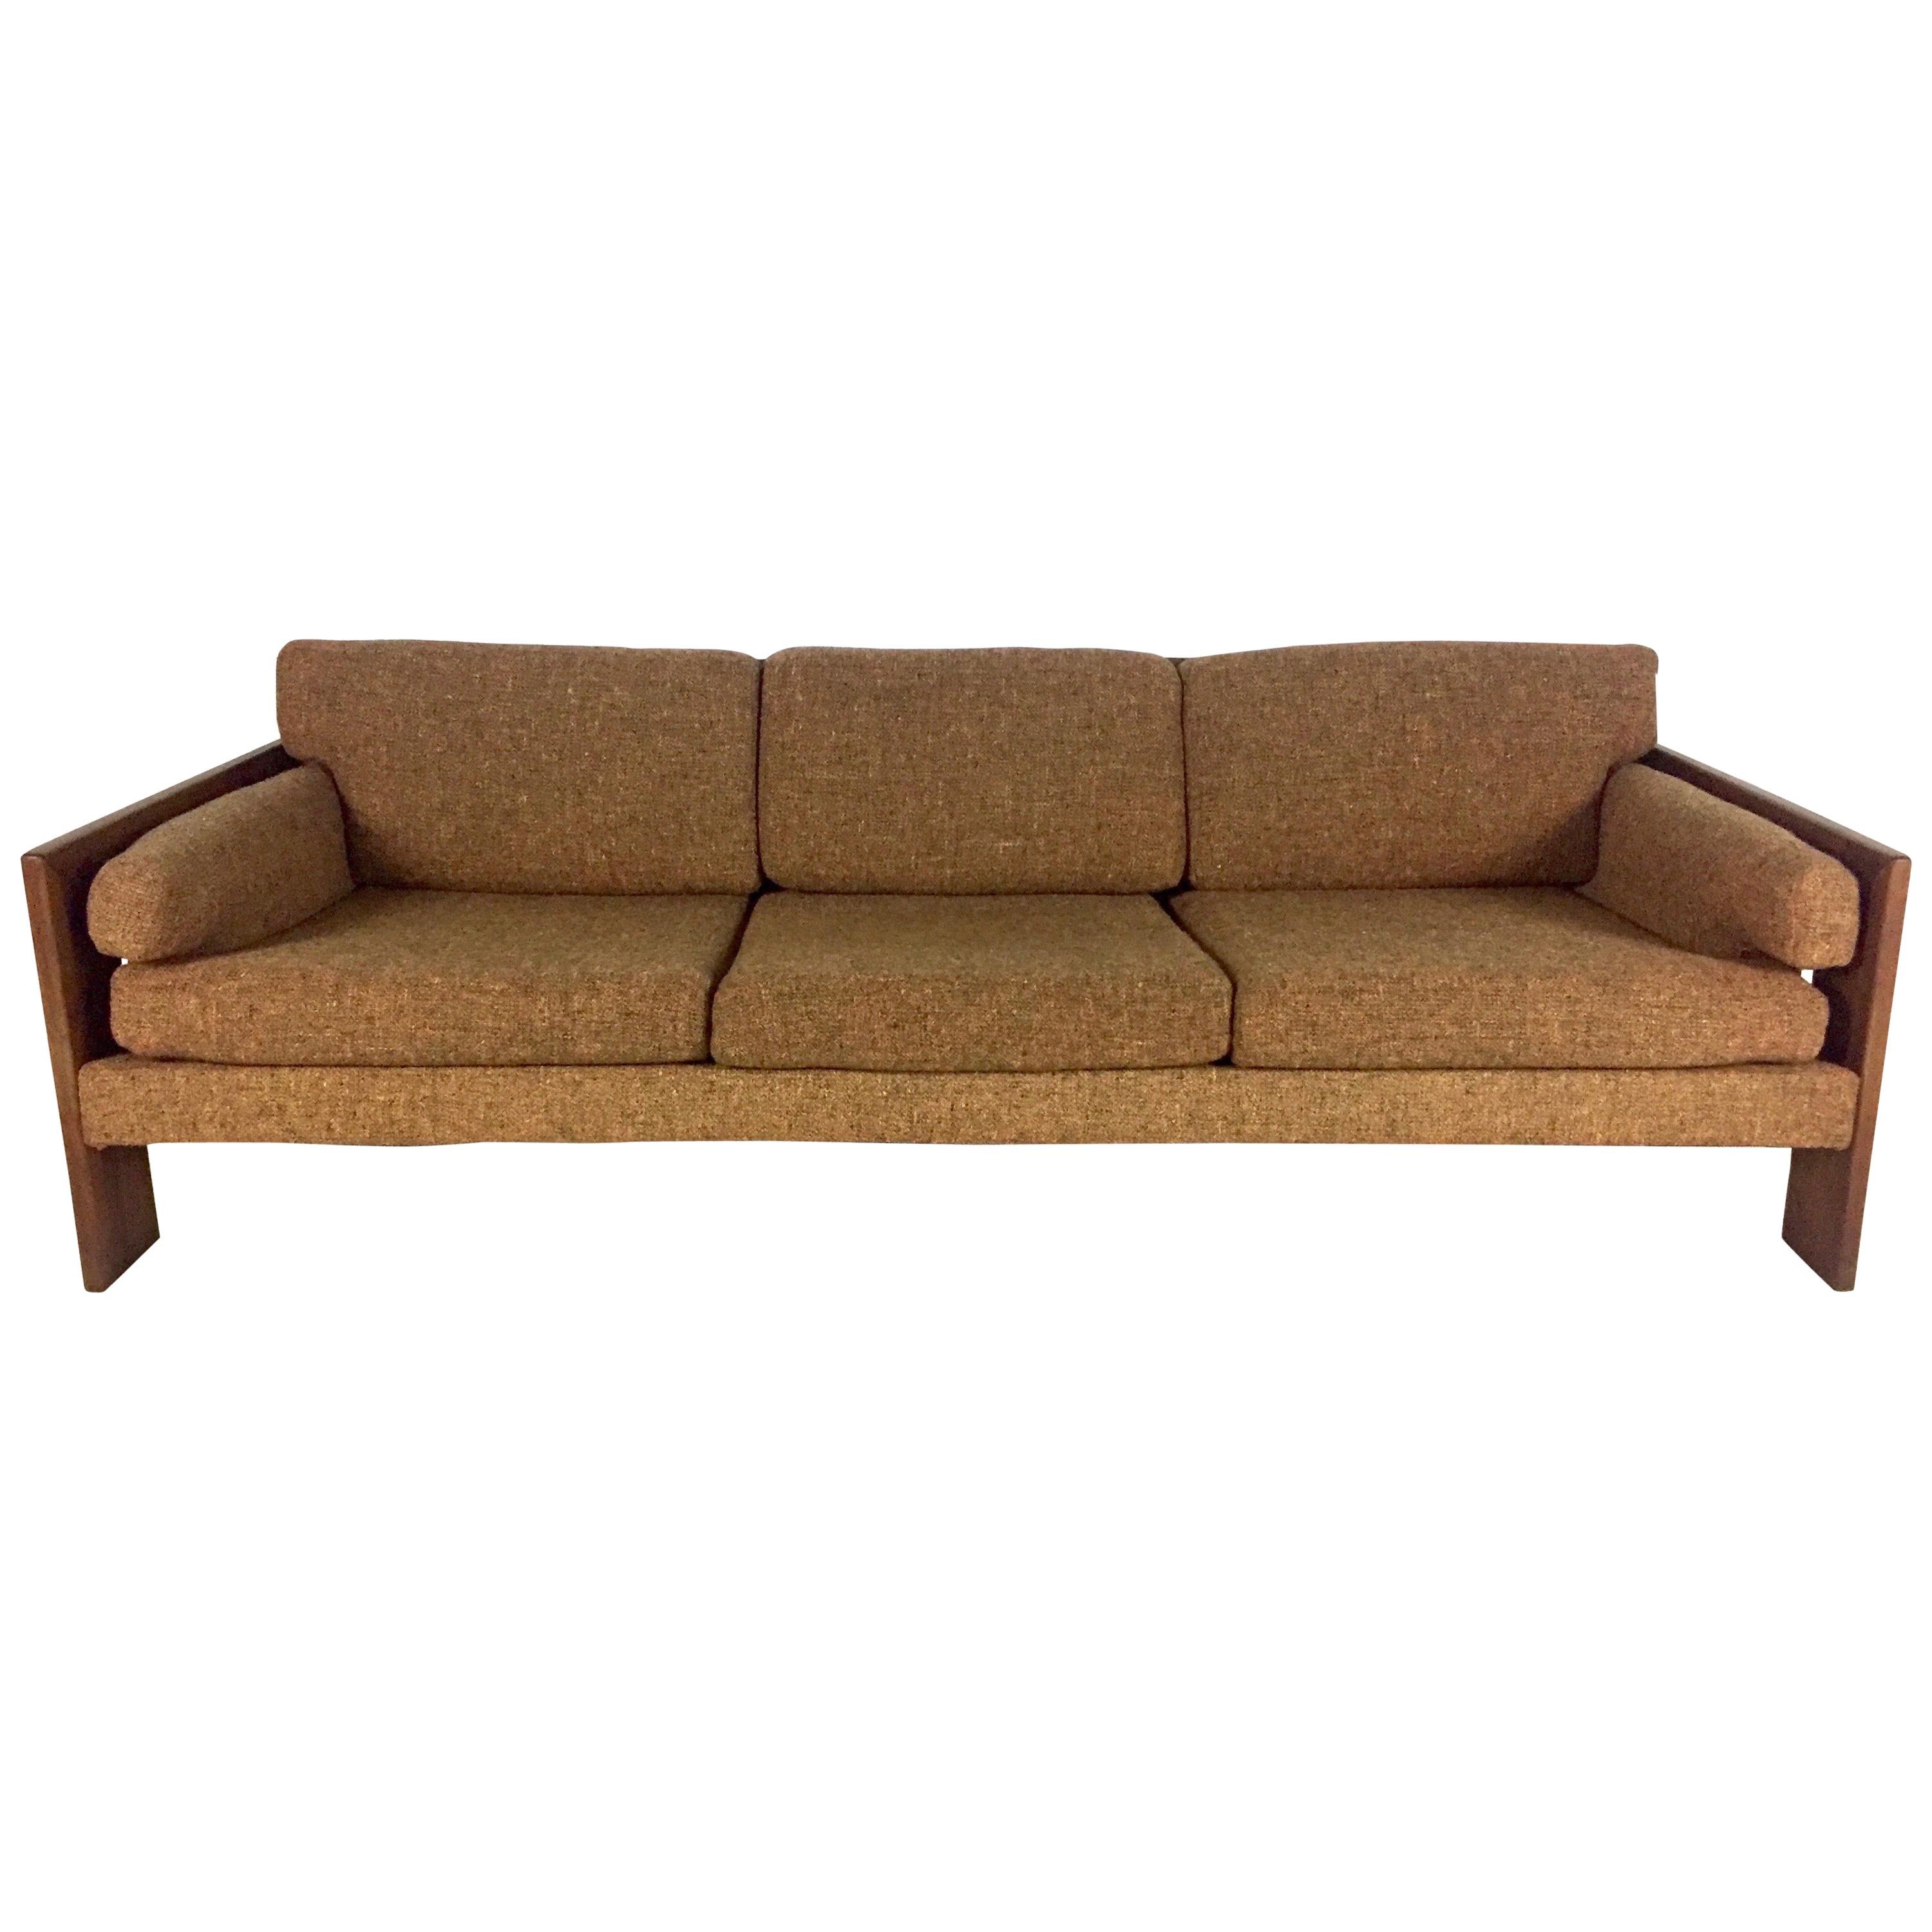 Adrian Pearsall Craft Associates Walnut Sofa with Brown Upholstery